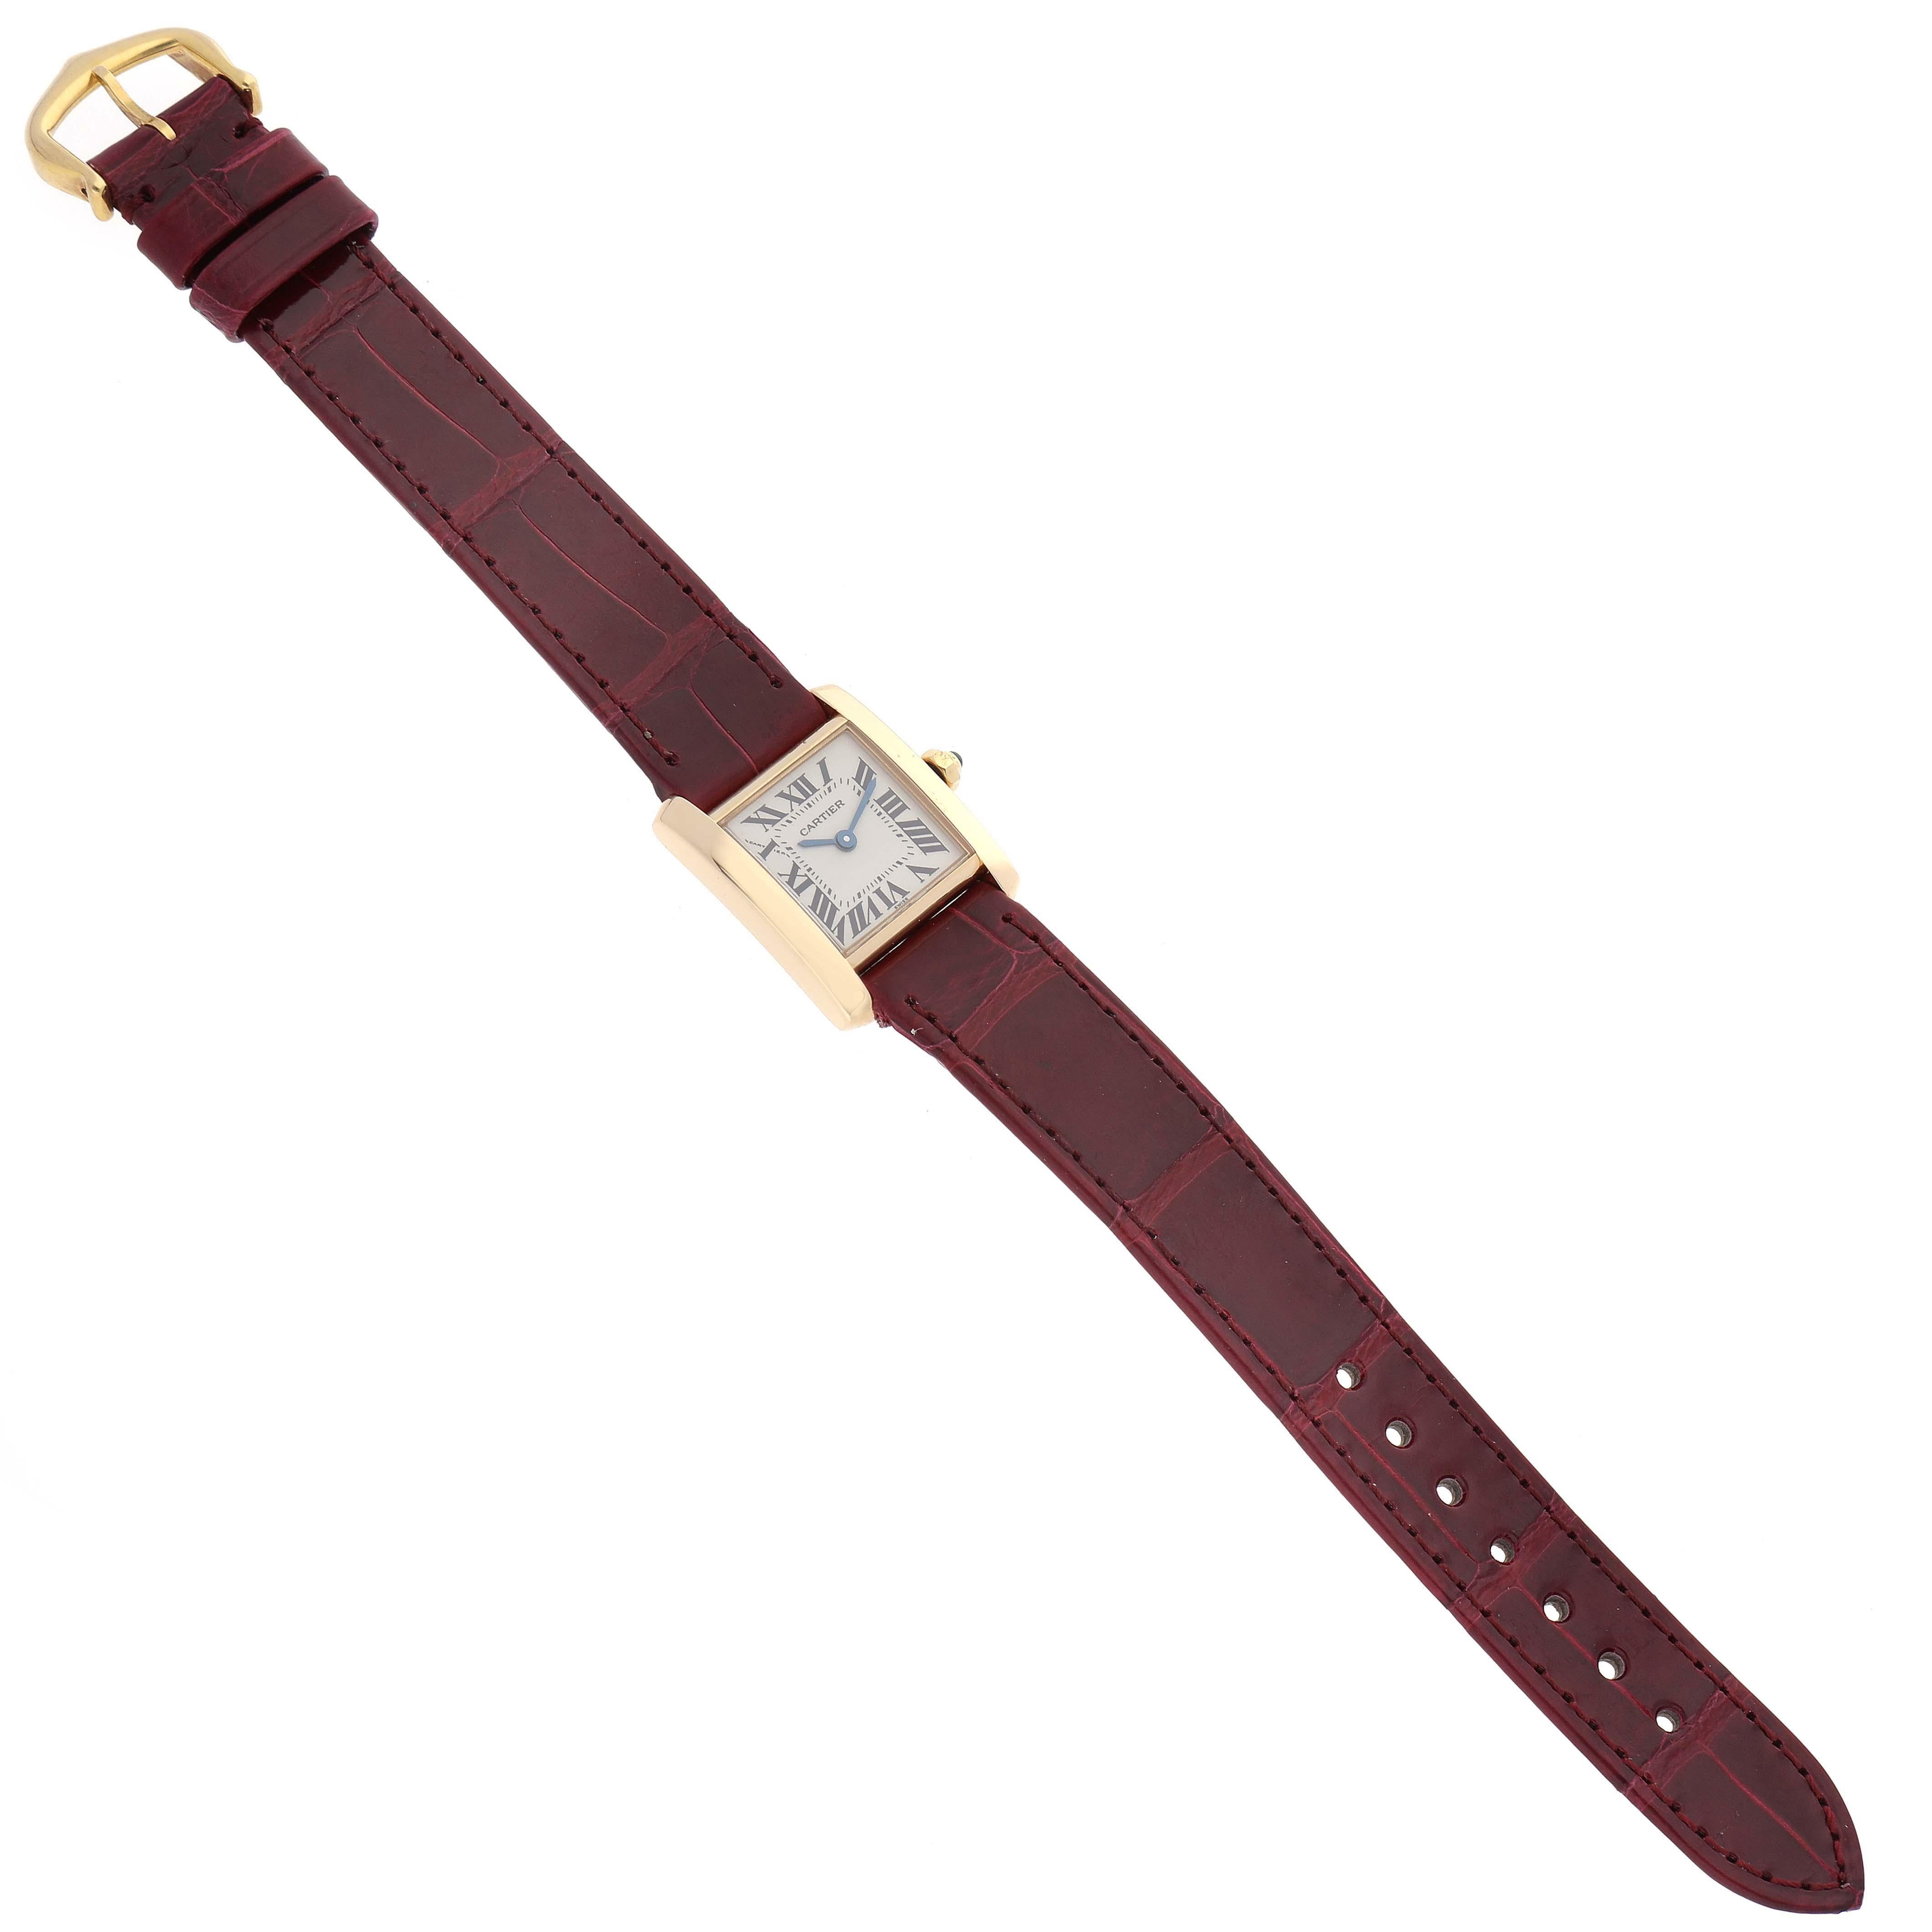 Cartier Tank Francaise Yellow Gold Burgundy Strap Ladies Watch W5000256 In Excellent Condition For Sale In Atlanta, GA